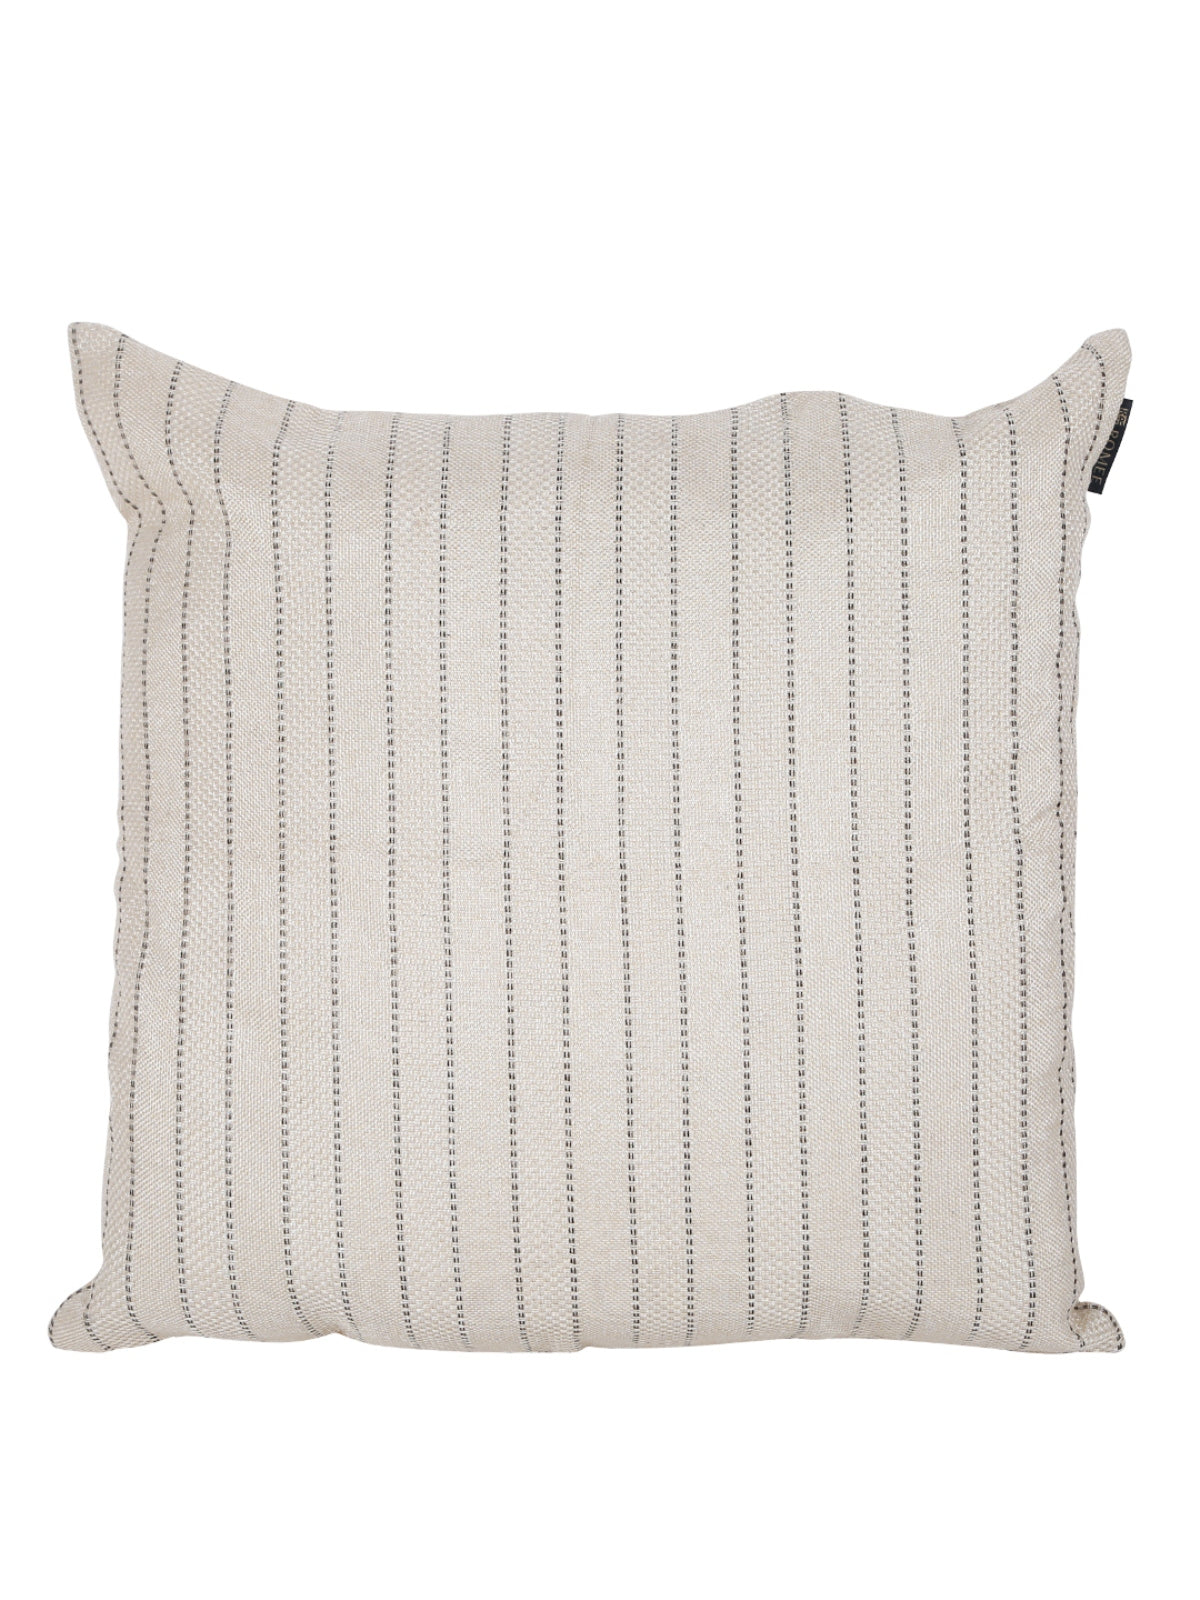 White Set of 2 Cushion Covers 24x24 Inch